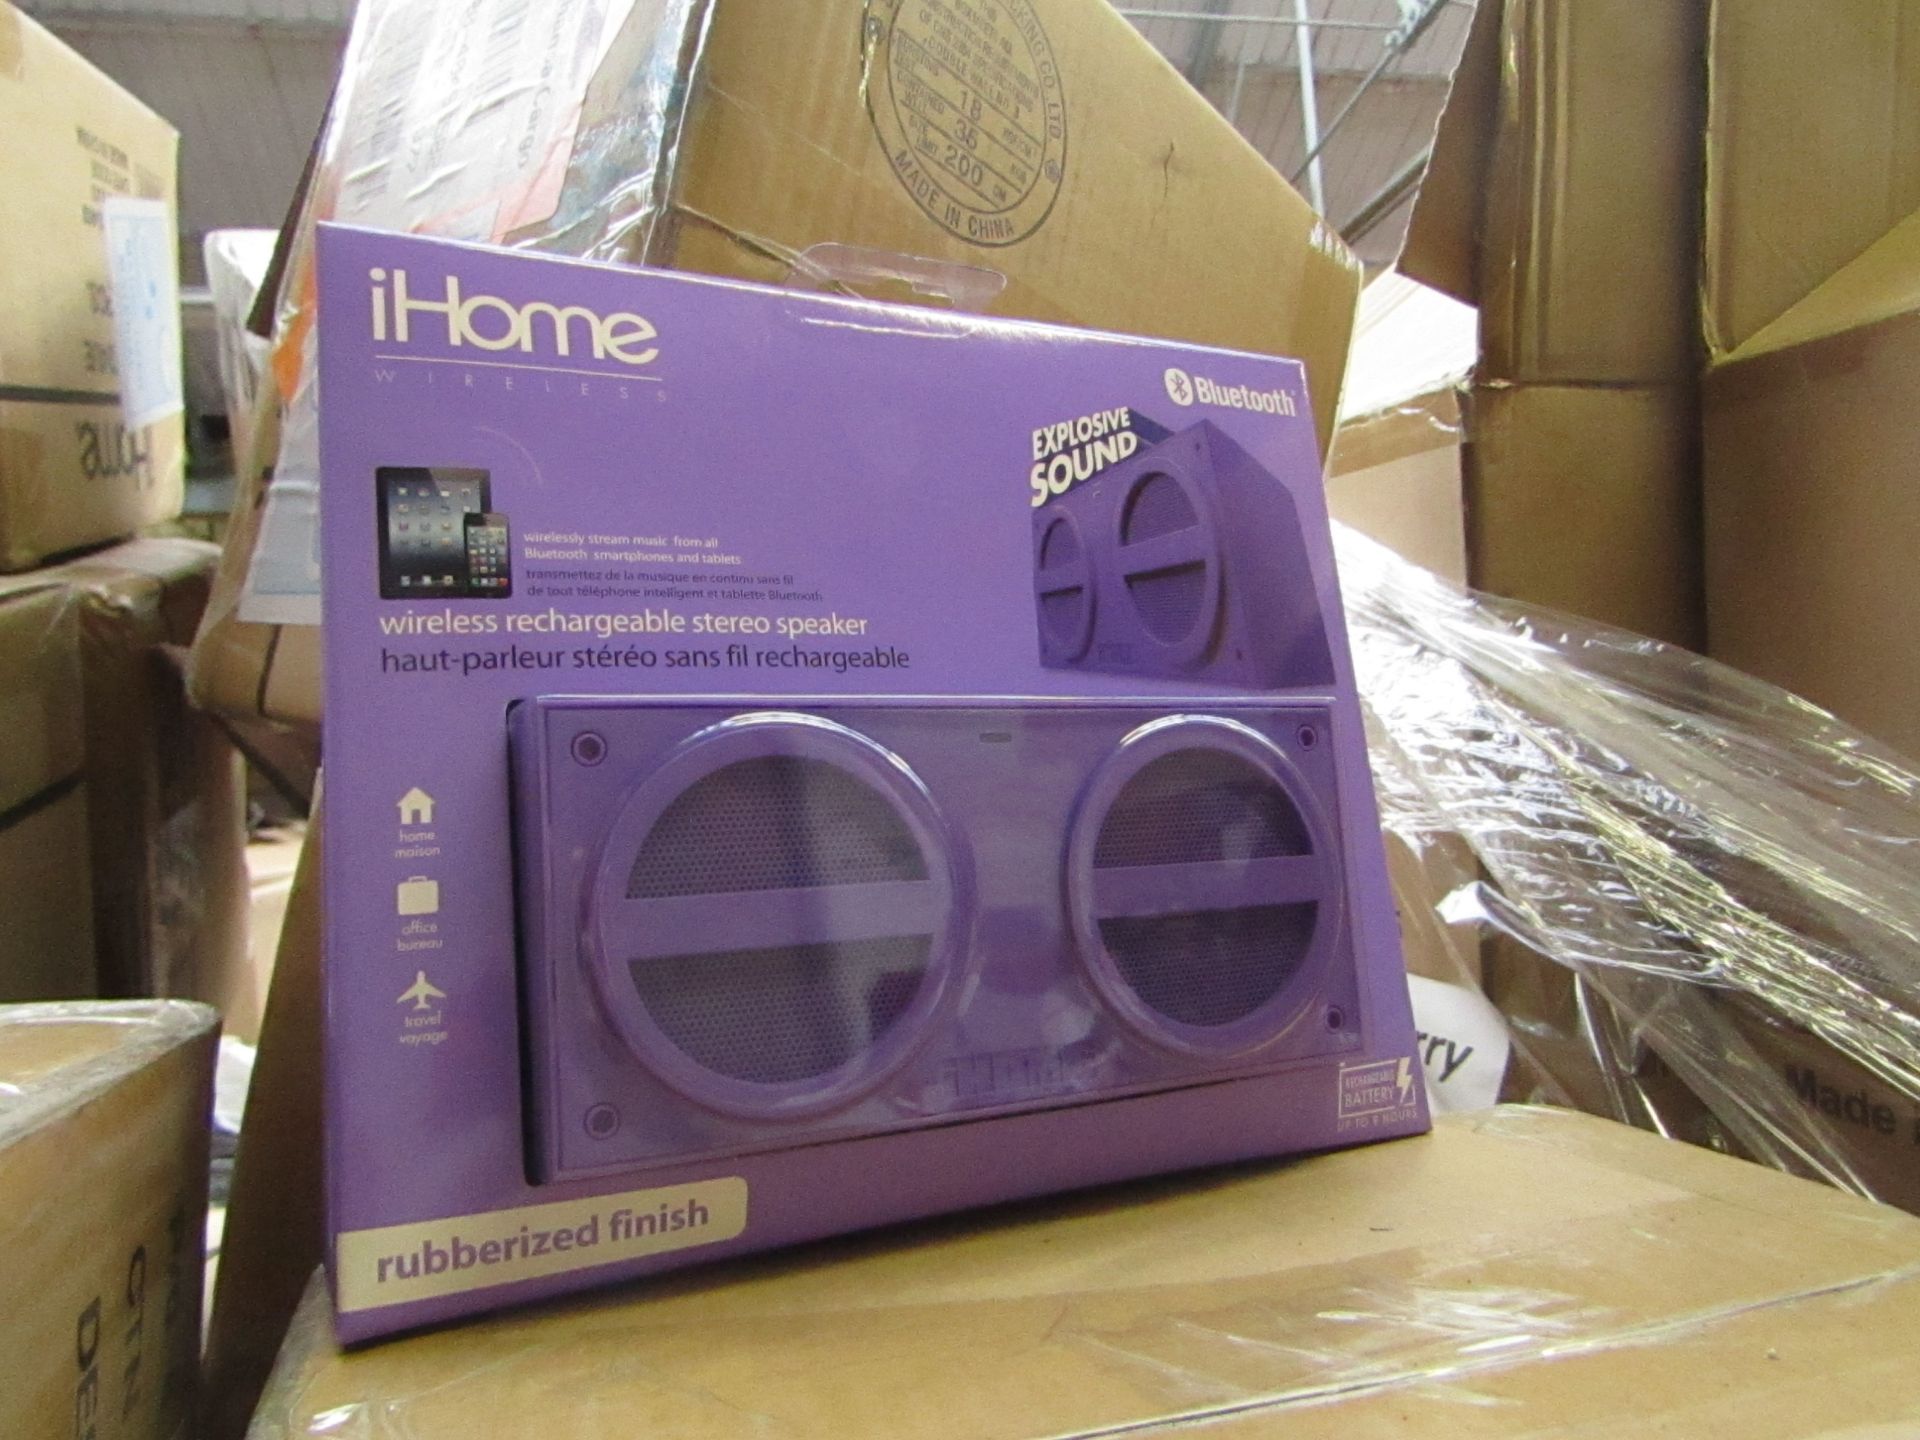 iHome, Wireless Rechargeable Stereo Speaker, New and Boxed